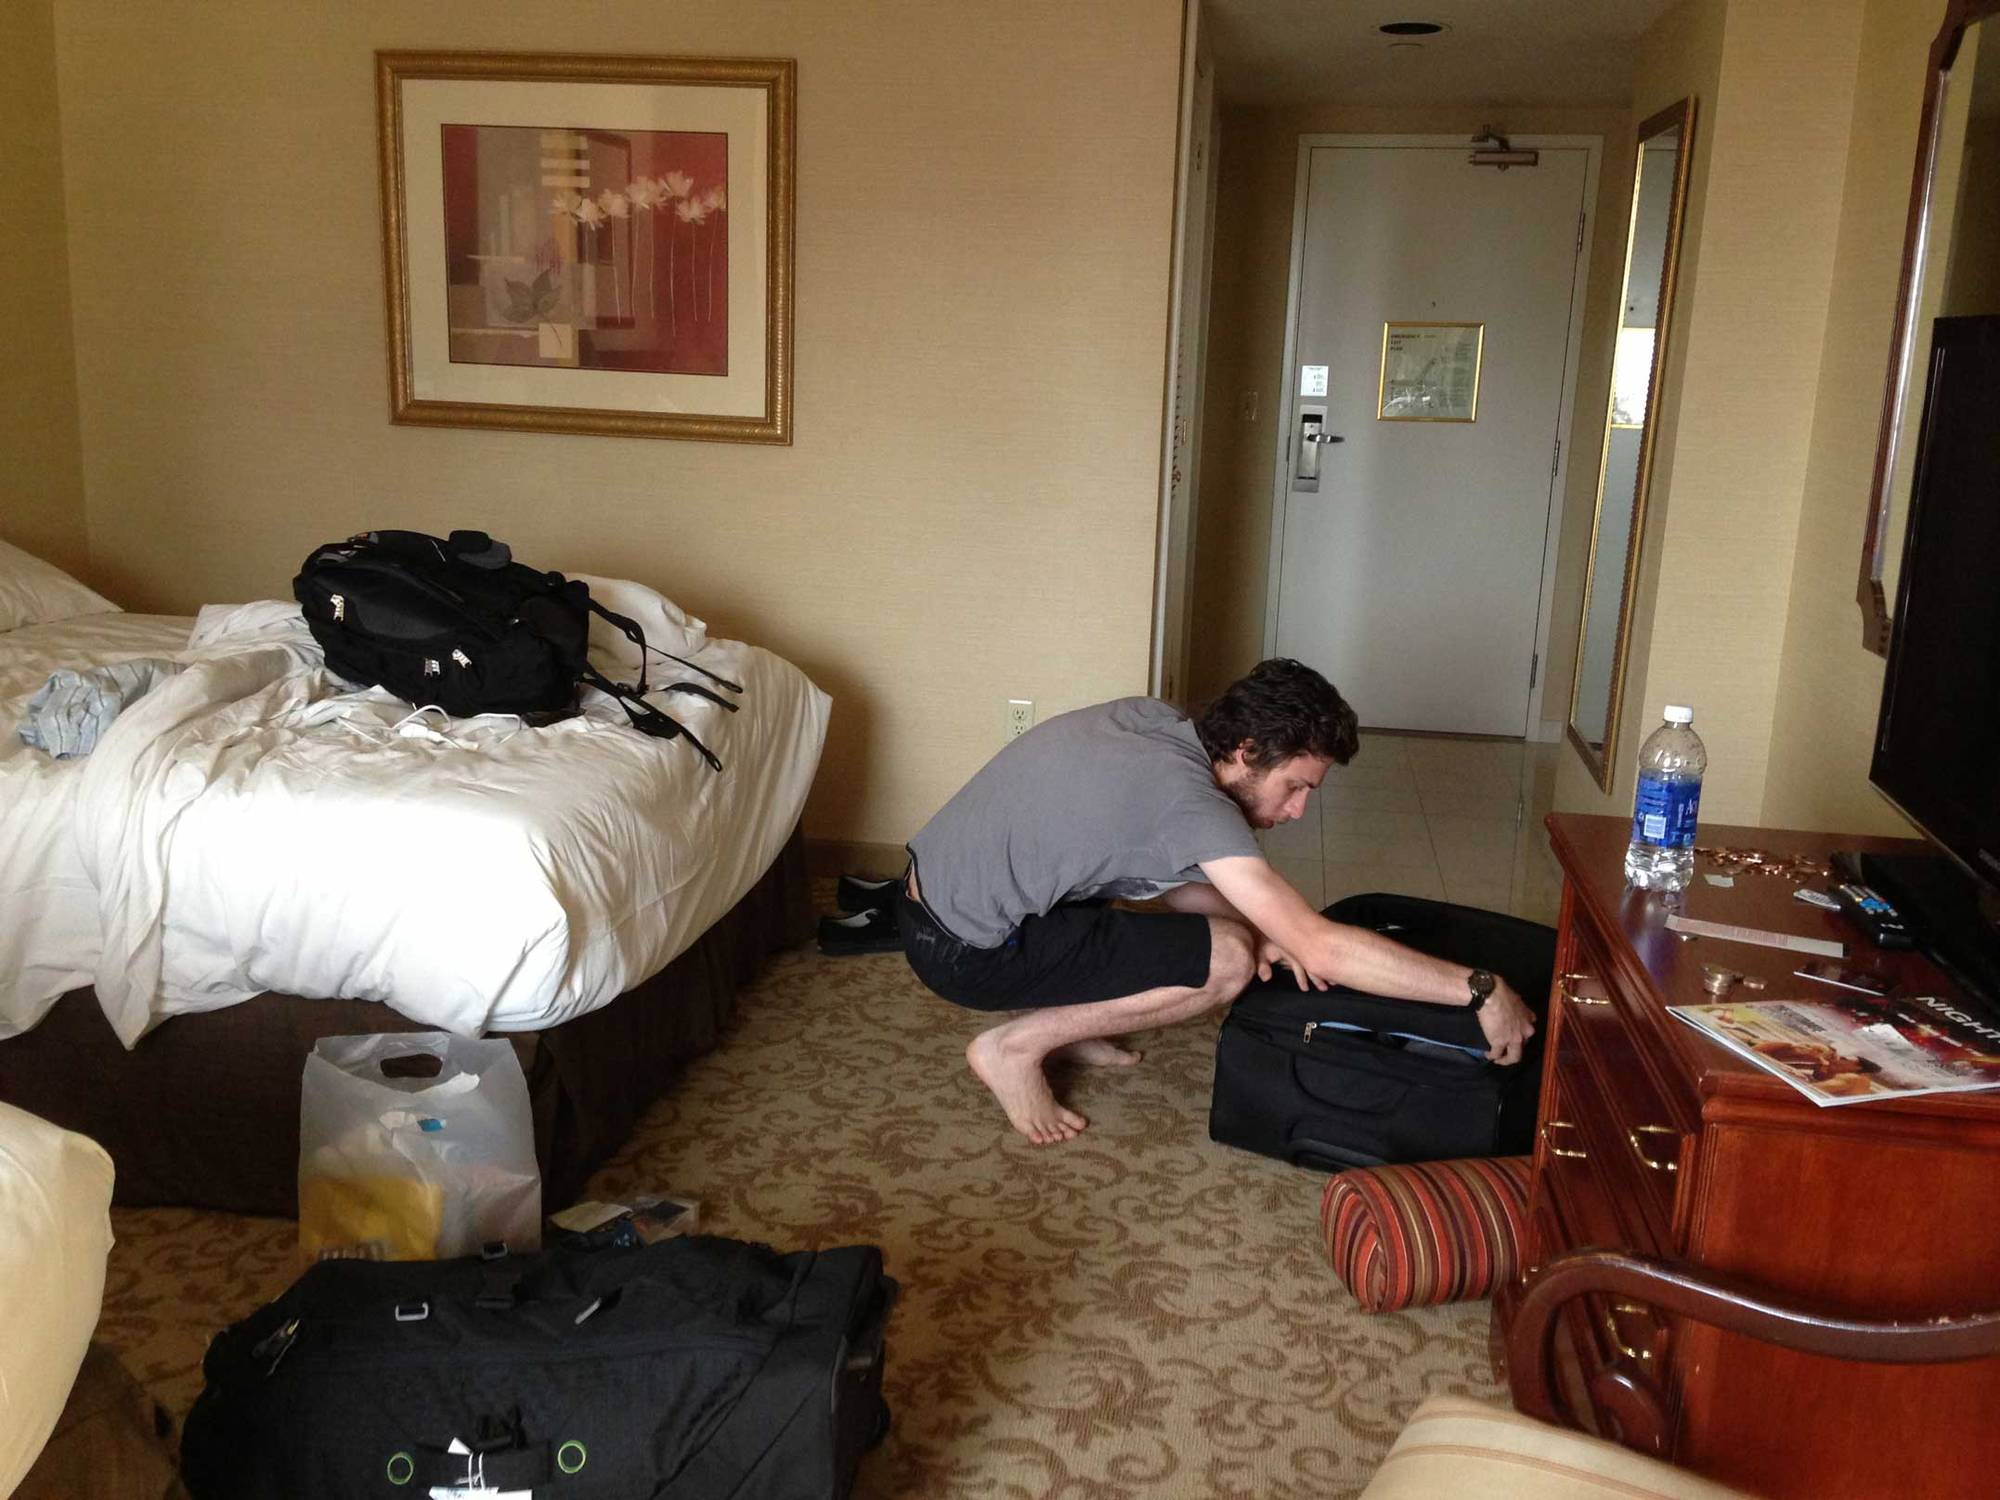 Irwin zipping up his suitcase